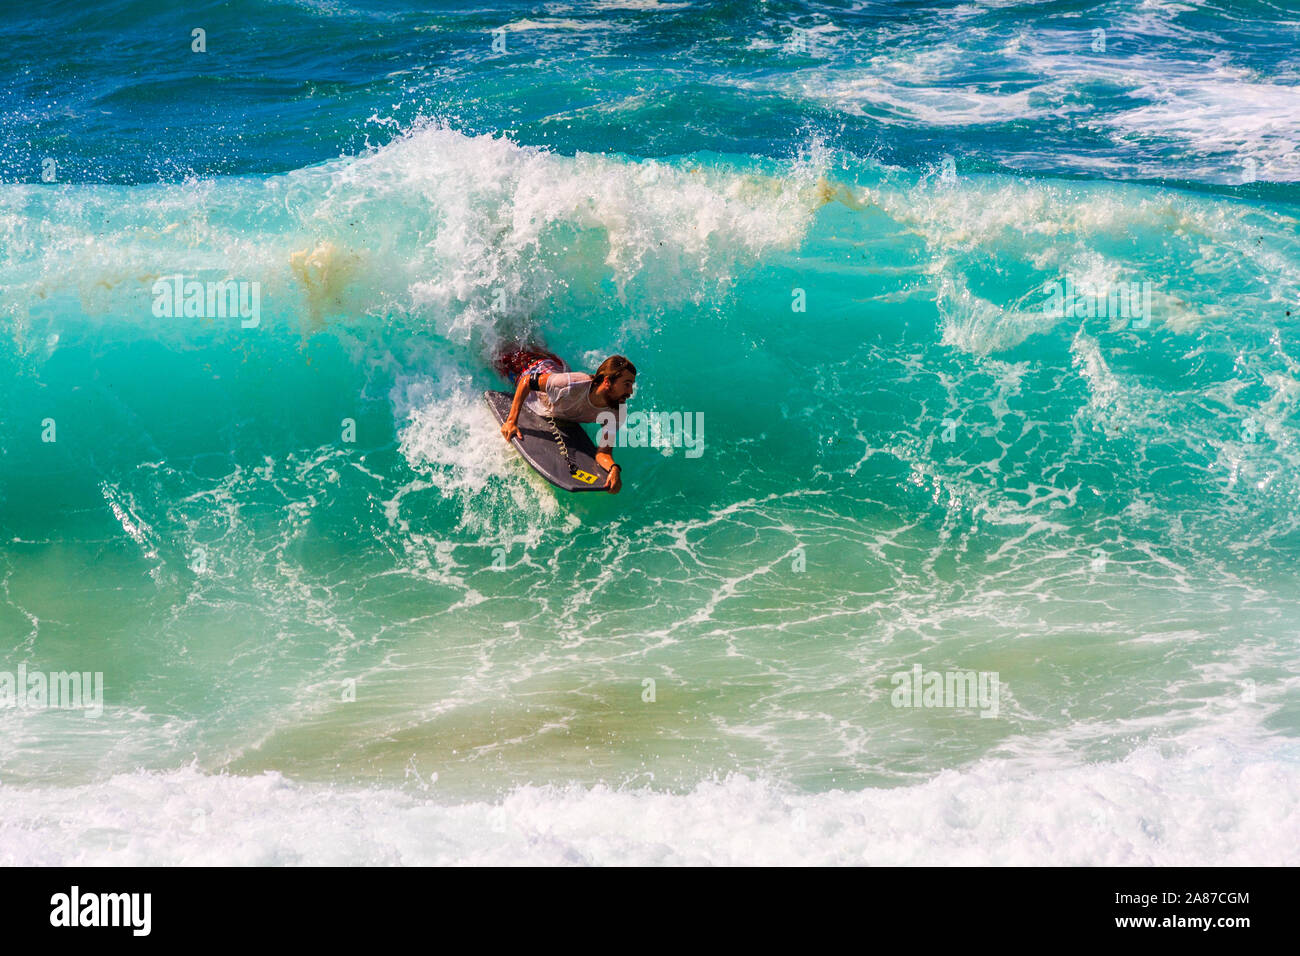 Sydney, Australia - March 16th 2013: Man surfing on a wave. The sport is very poular. Stock Photo